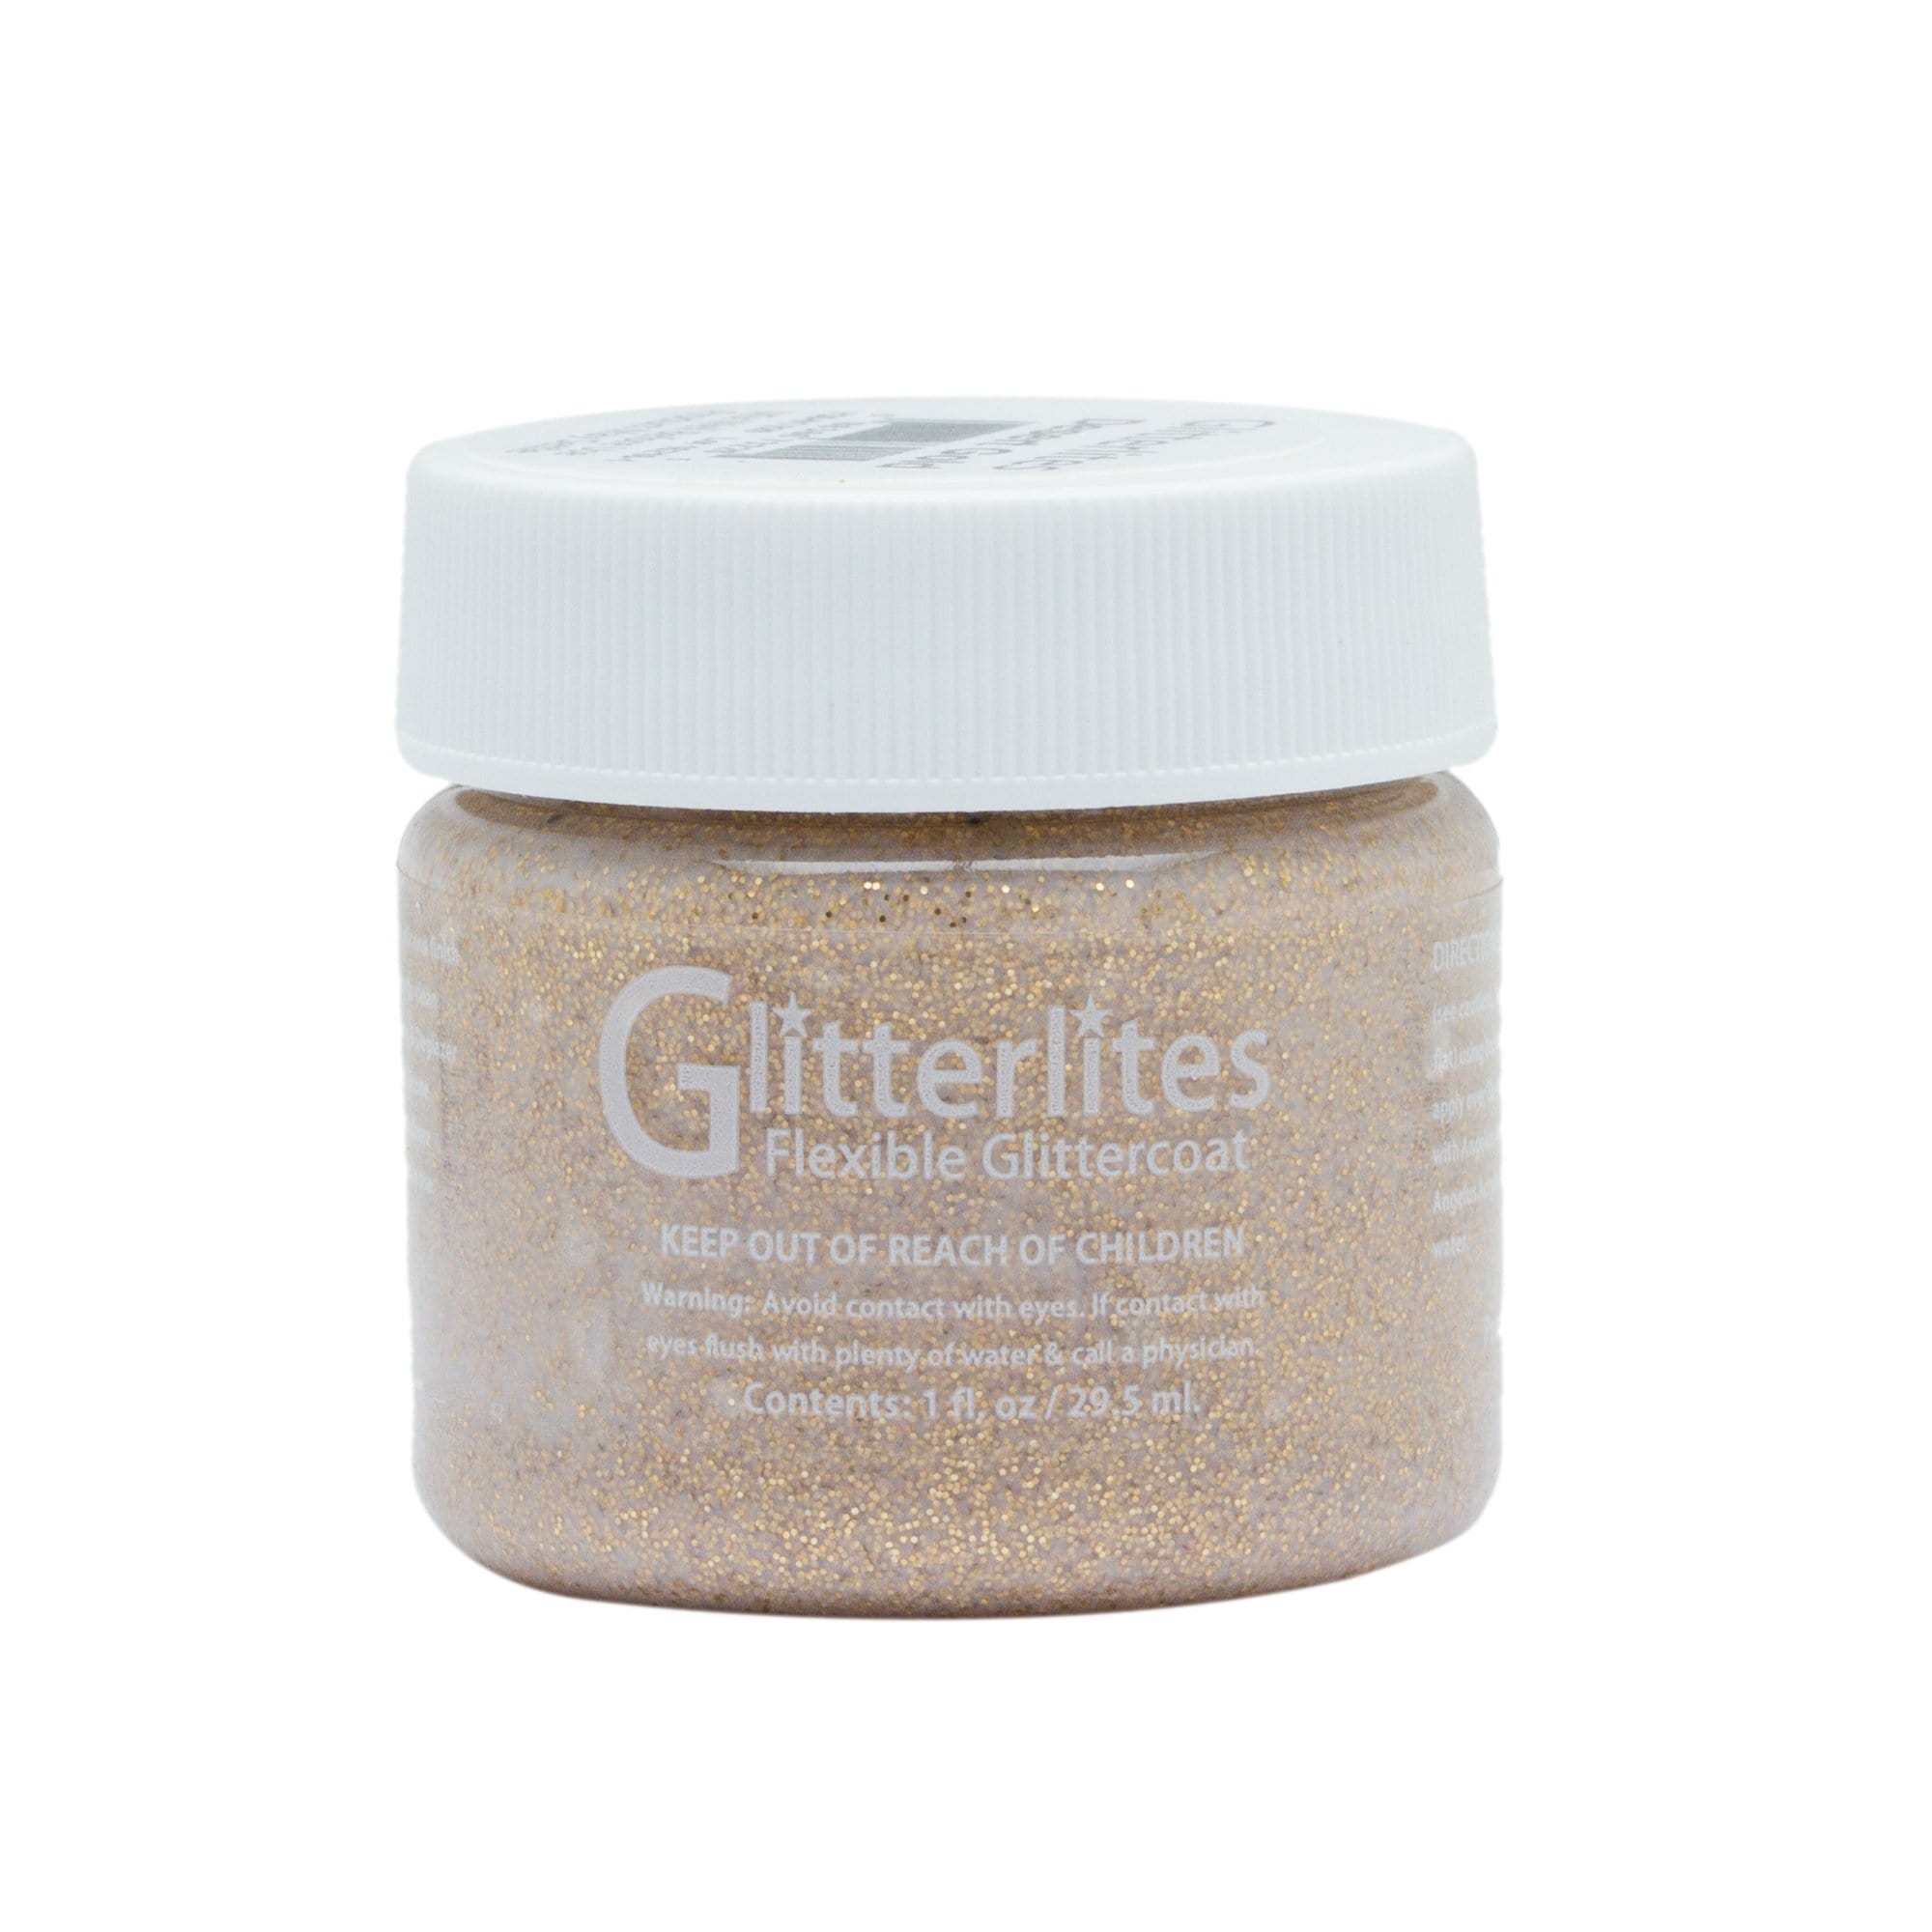 Angelus Glitterlites in Desert Gold are perfect for DIY projects and custom jobs that need some sparkle.